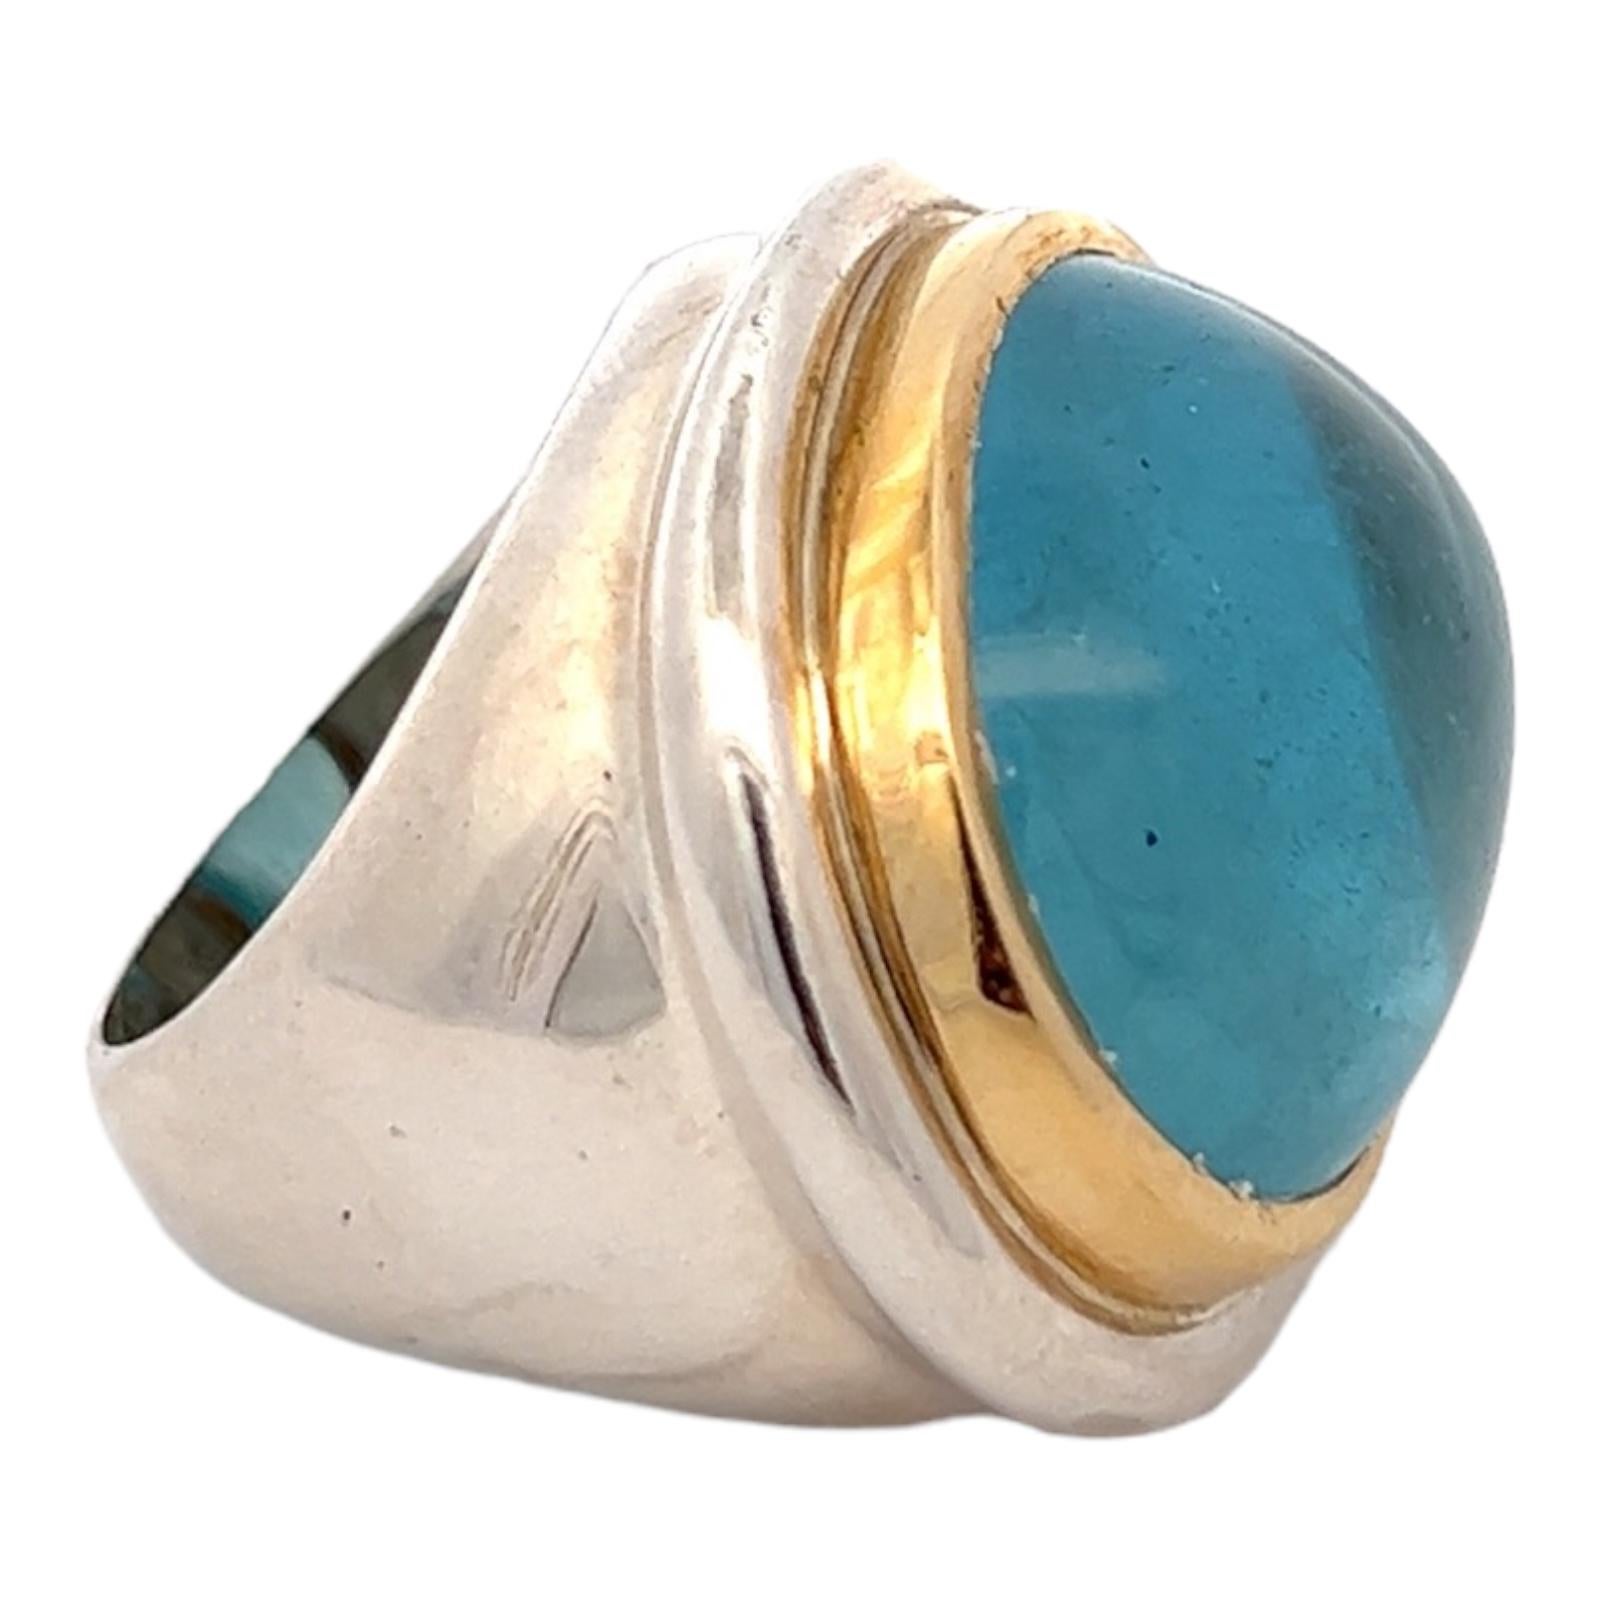 Fabulous vintage aquamarine cocktail ring by designer Paloma Picasso for Tiffany & Co. The ring features an approximately 50 carat blue aquamarine cabochon gemstone bezel set into a sterling silver and 18 karat yellow gold statement ring. The rop